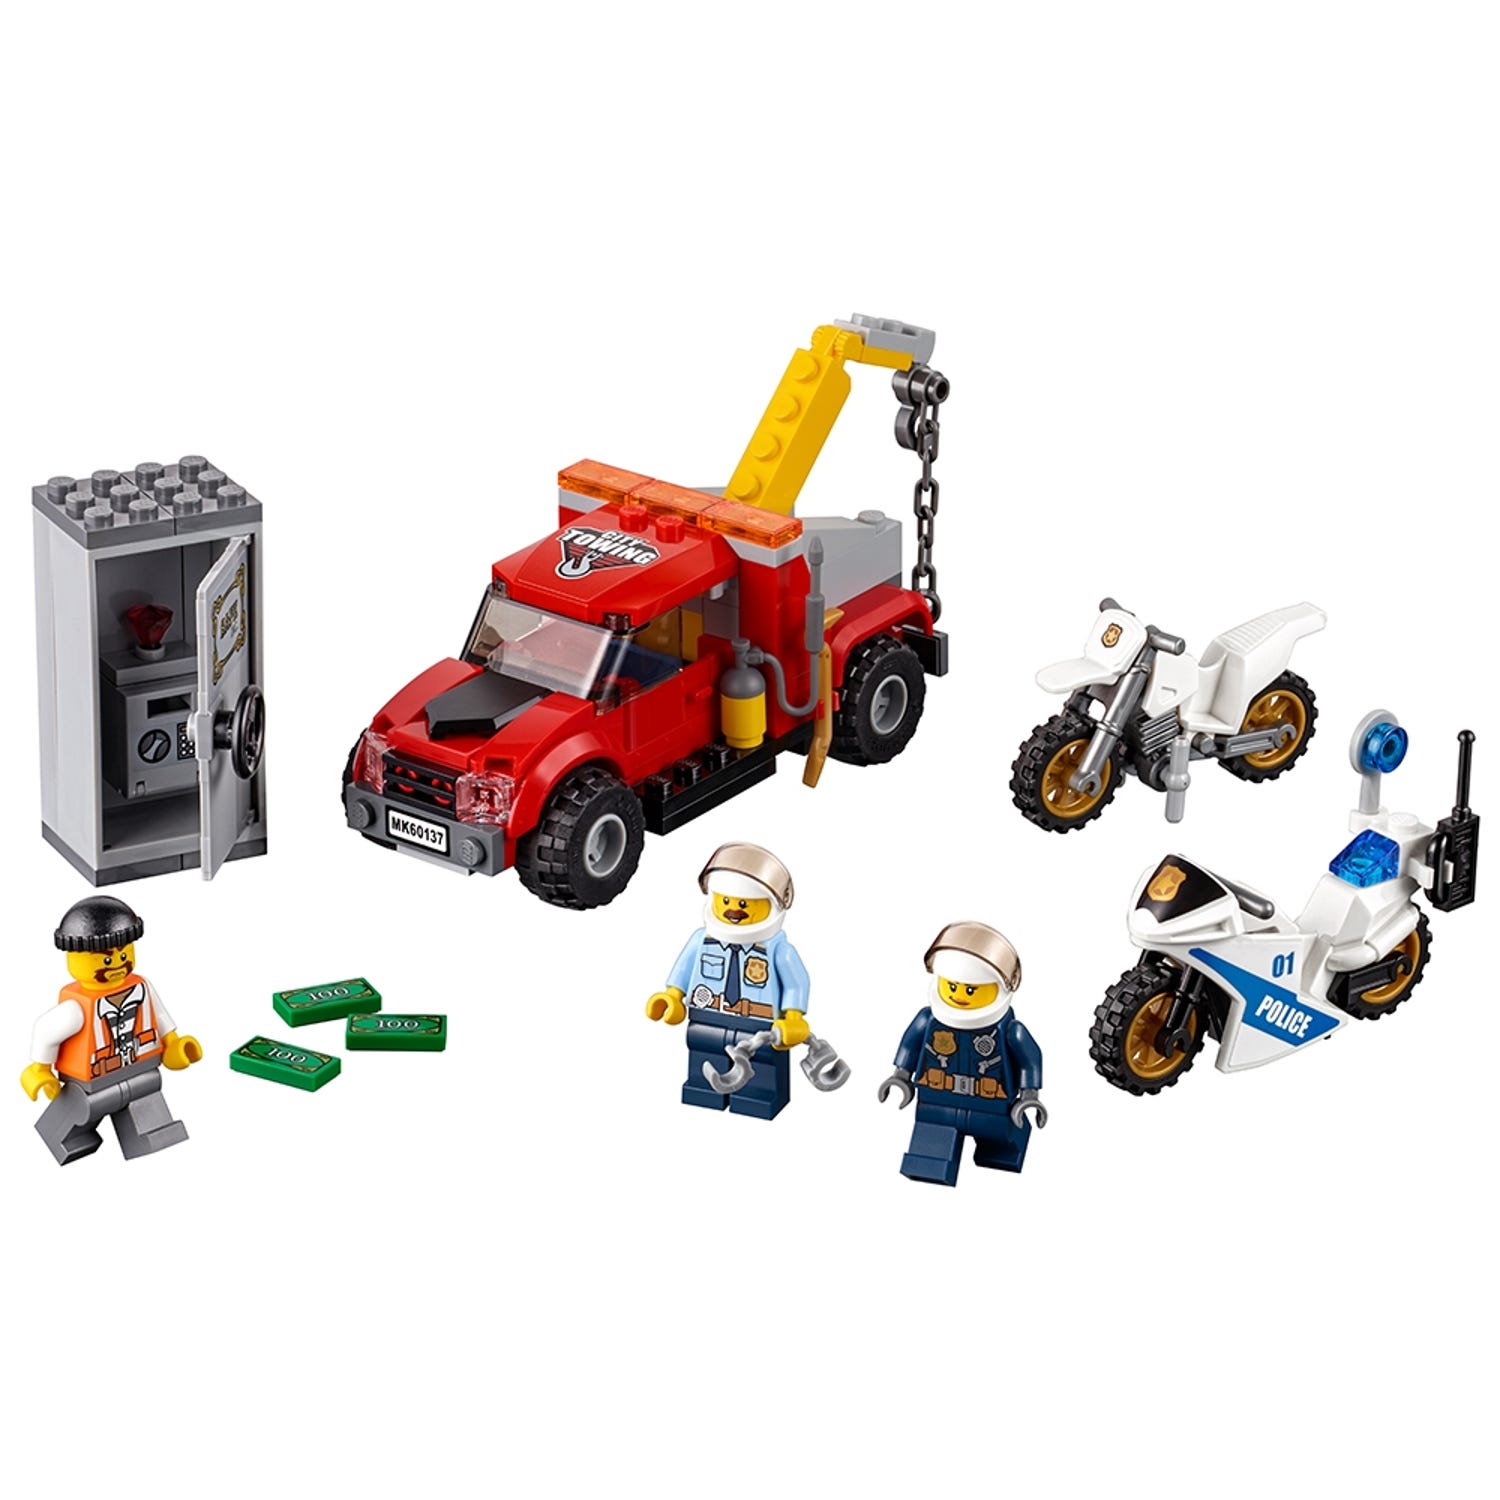 Tow Truck Trouble 60137 | Buy online at the Official LEGO® Shop